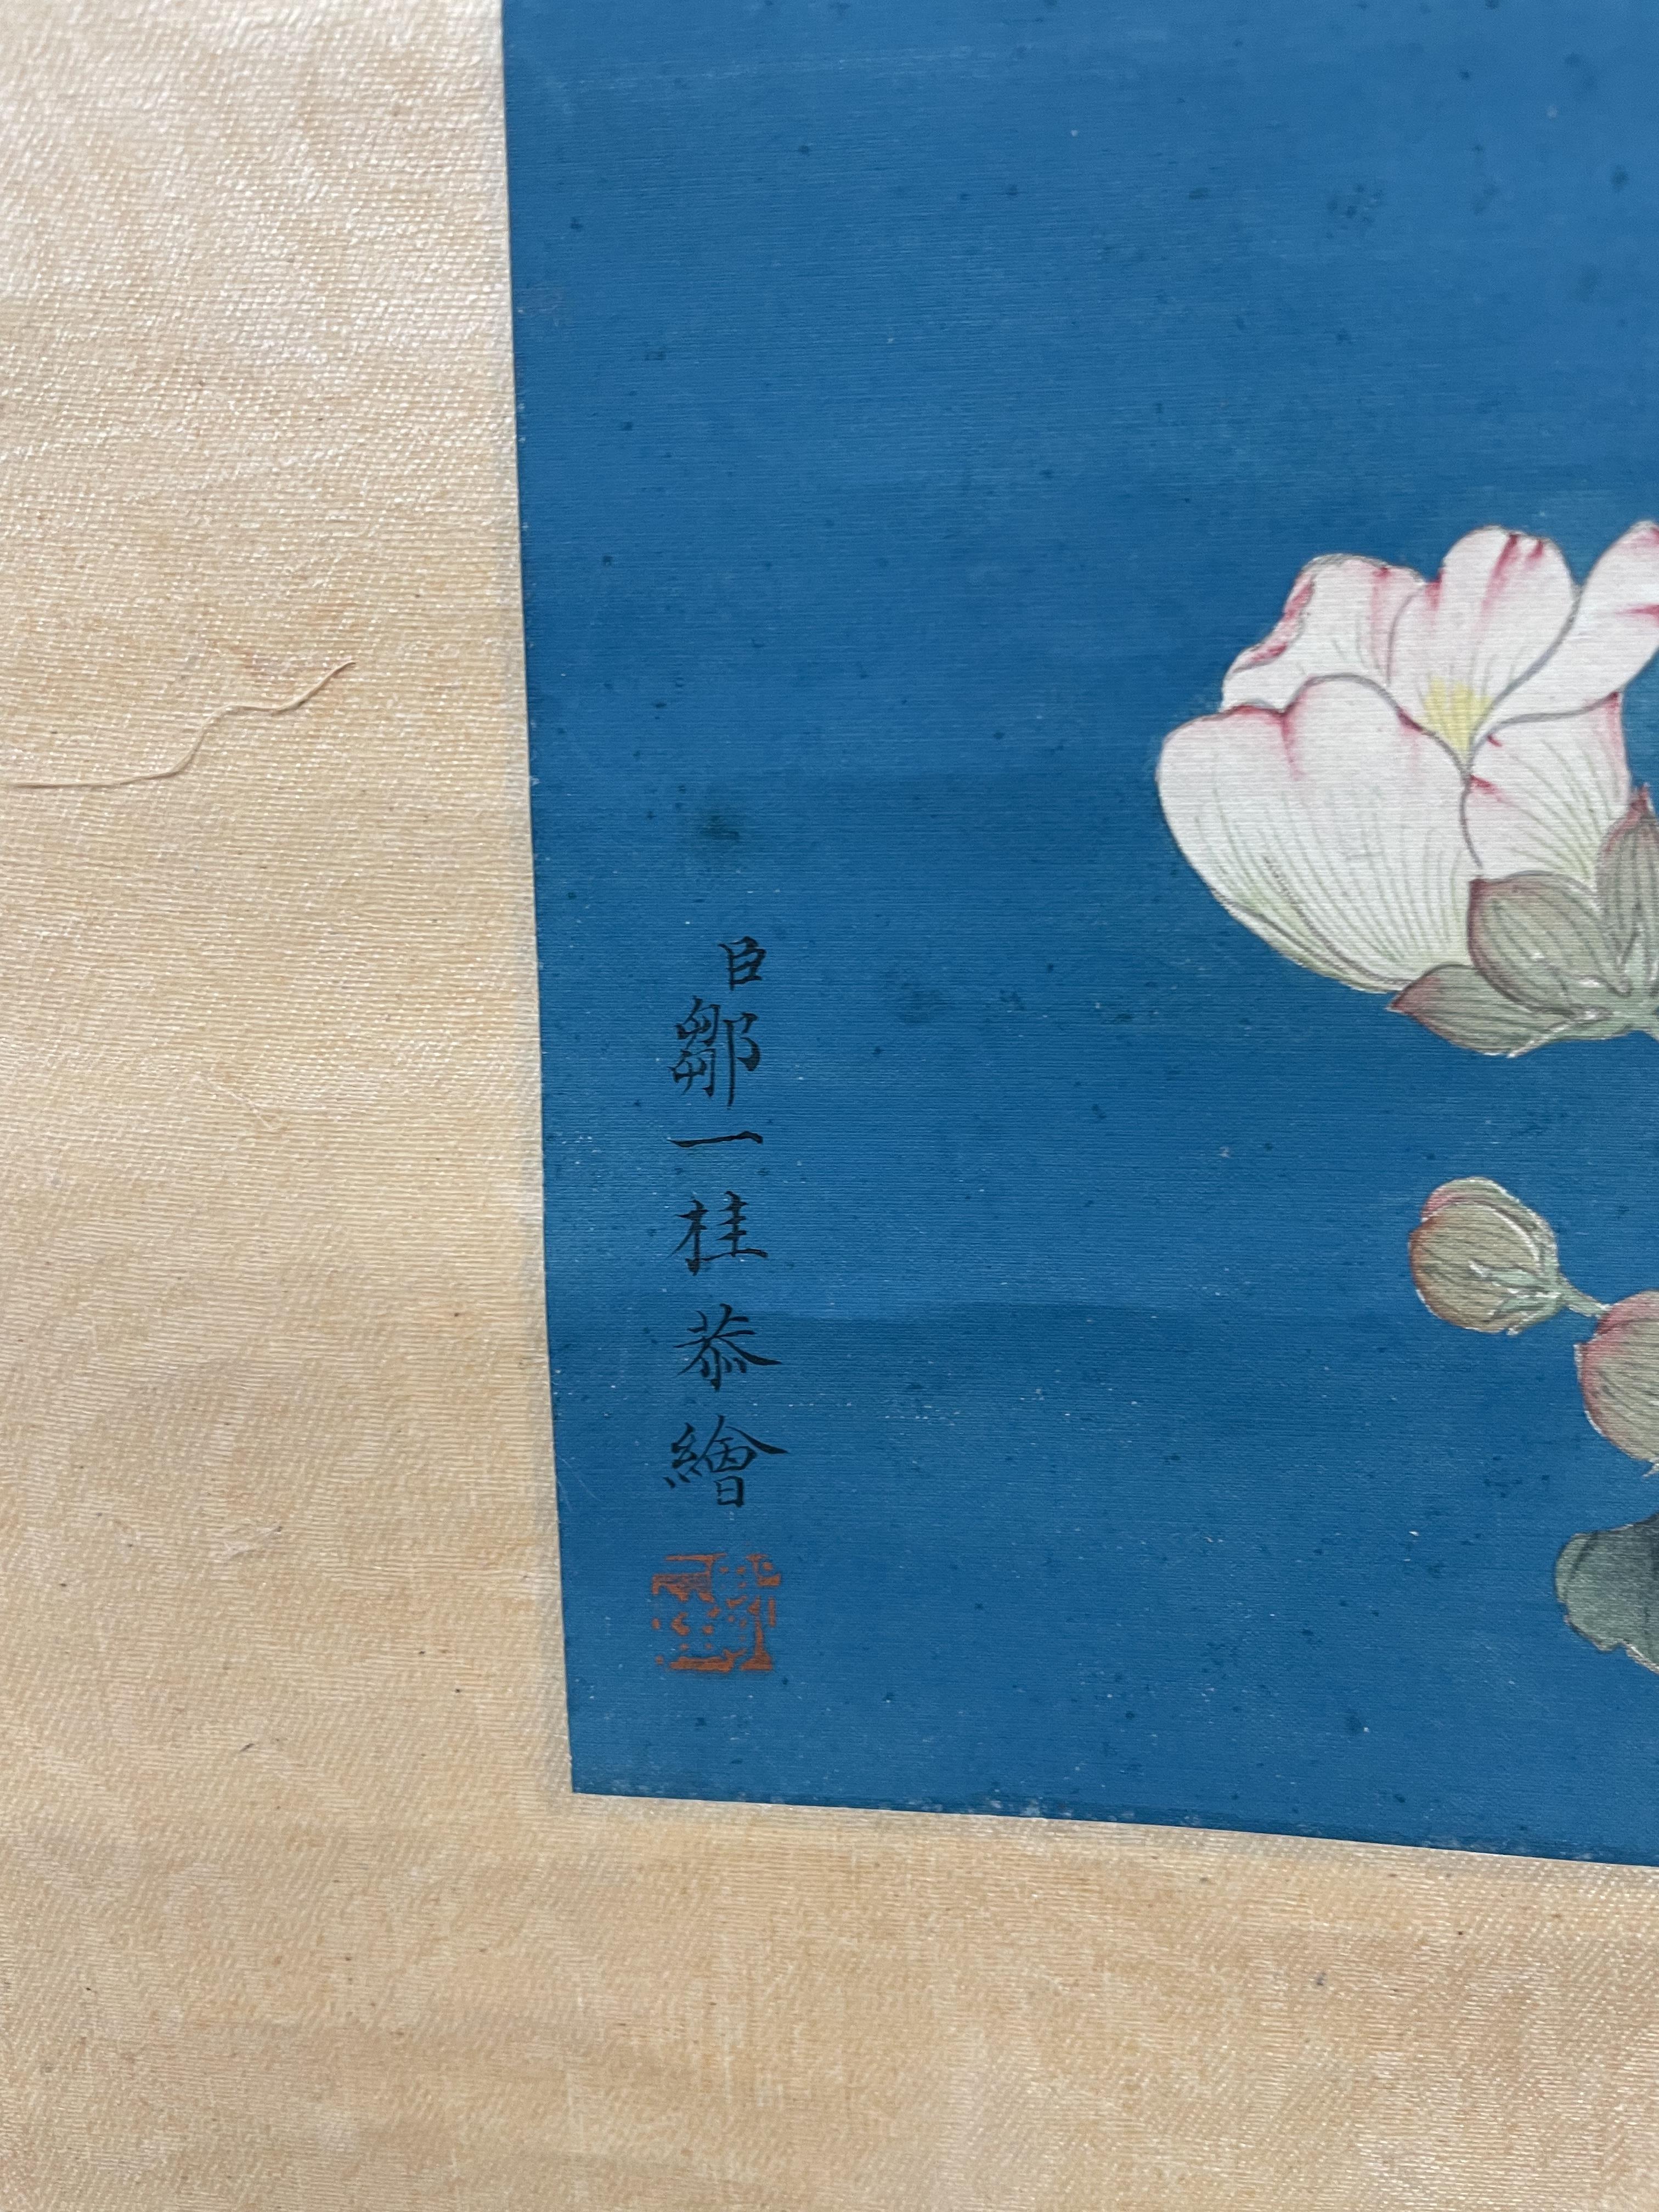 ZOU YIGUI 鄒一桂 (Wuxi, China, 1686 - 1772) Four flower paintings 花卉軸四件 - Image 13 of 17